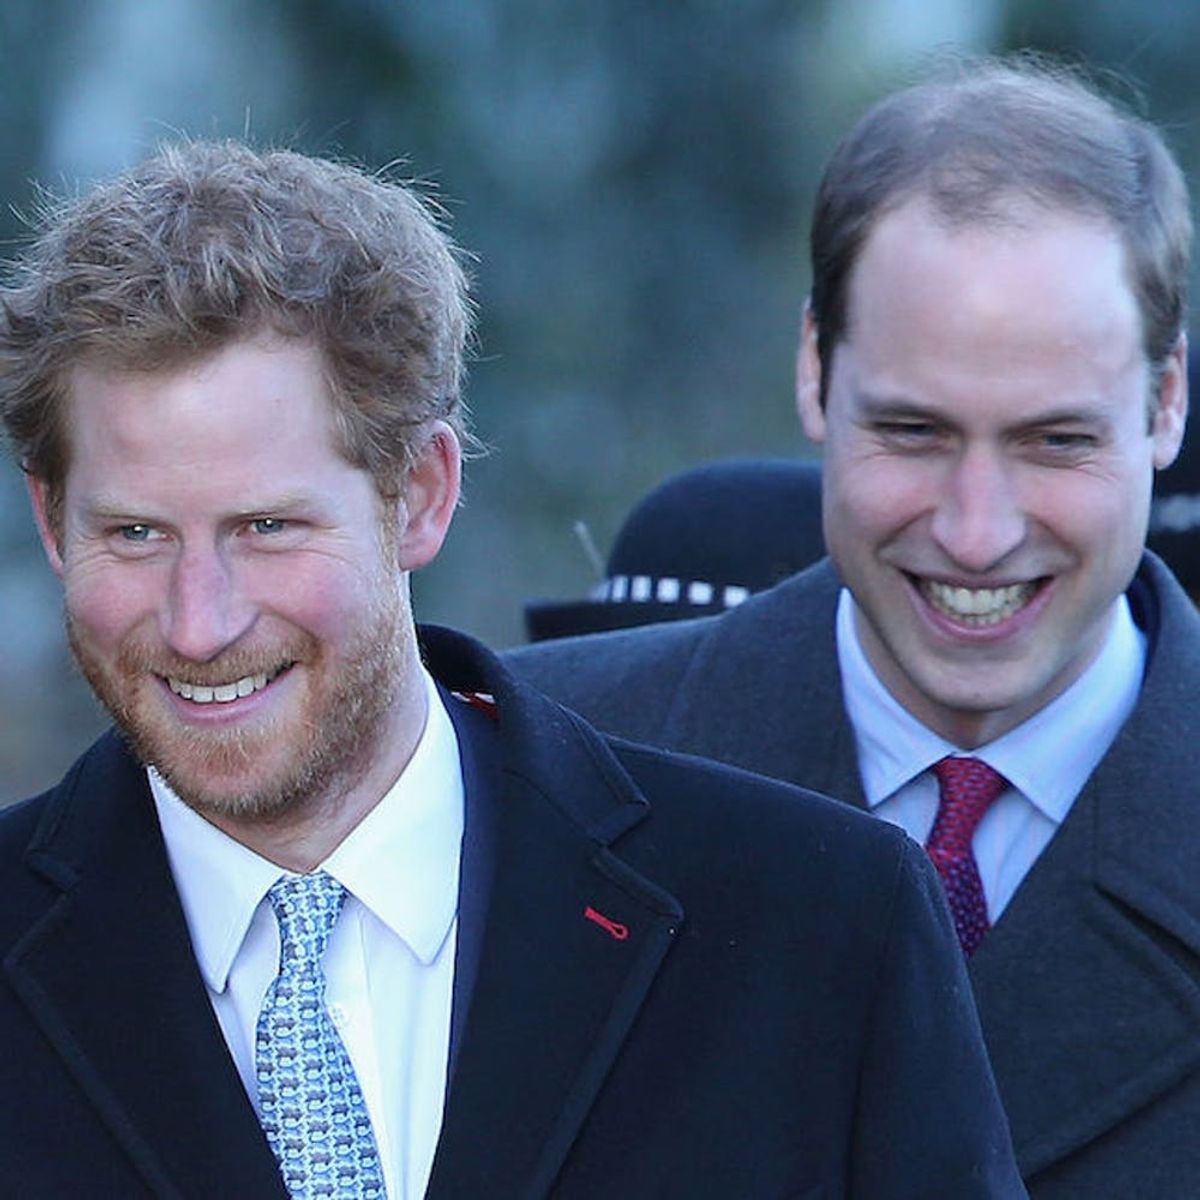 Princes William and Harry Open Up About Life With Princess Diana in an Emotional New Documentary